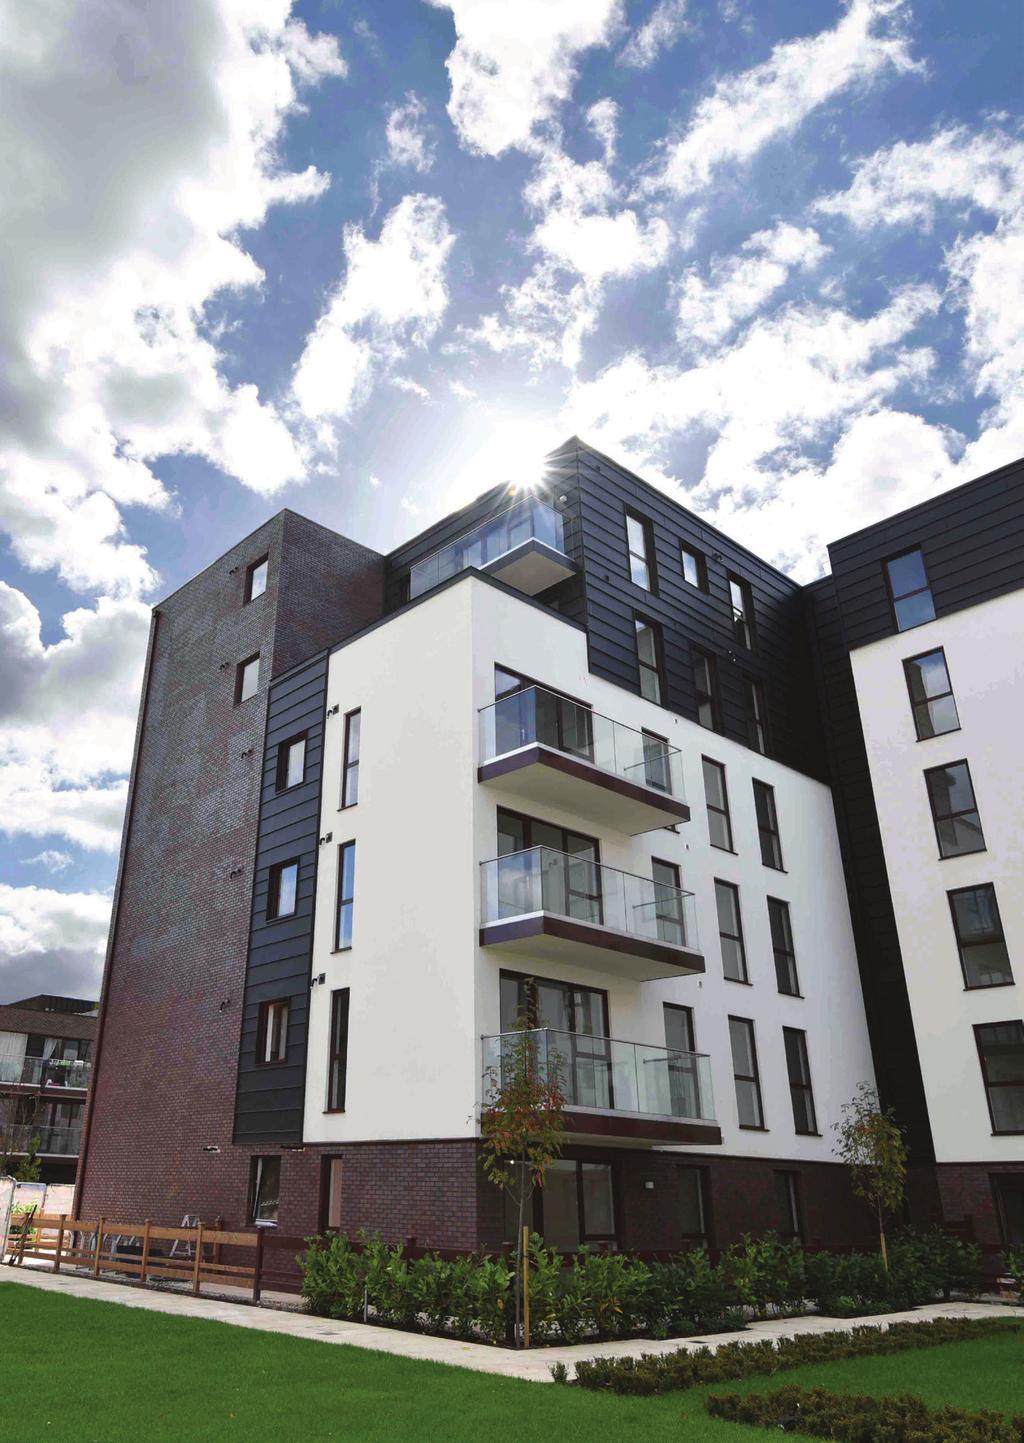 Case Study Project Baylis Old School Scope Smoke control and natural smoke ventilation in an award-winning residential scheme Product Em-Vent & control panels Em-Vent smoke vents Em-Vent is a